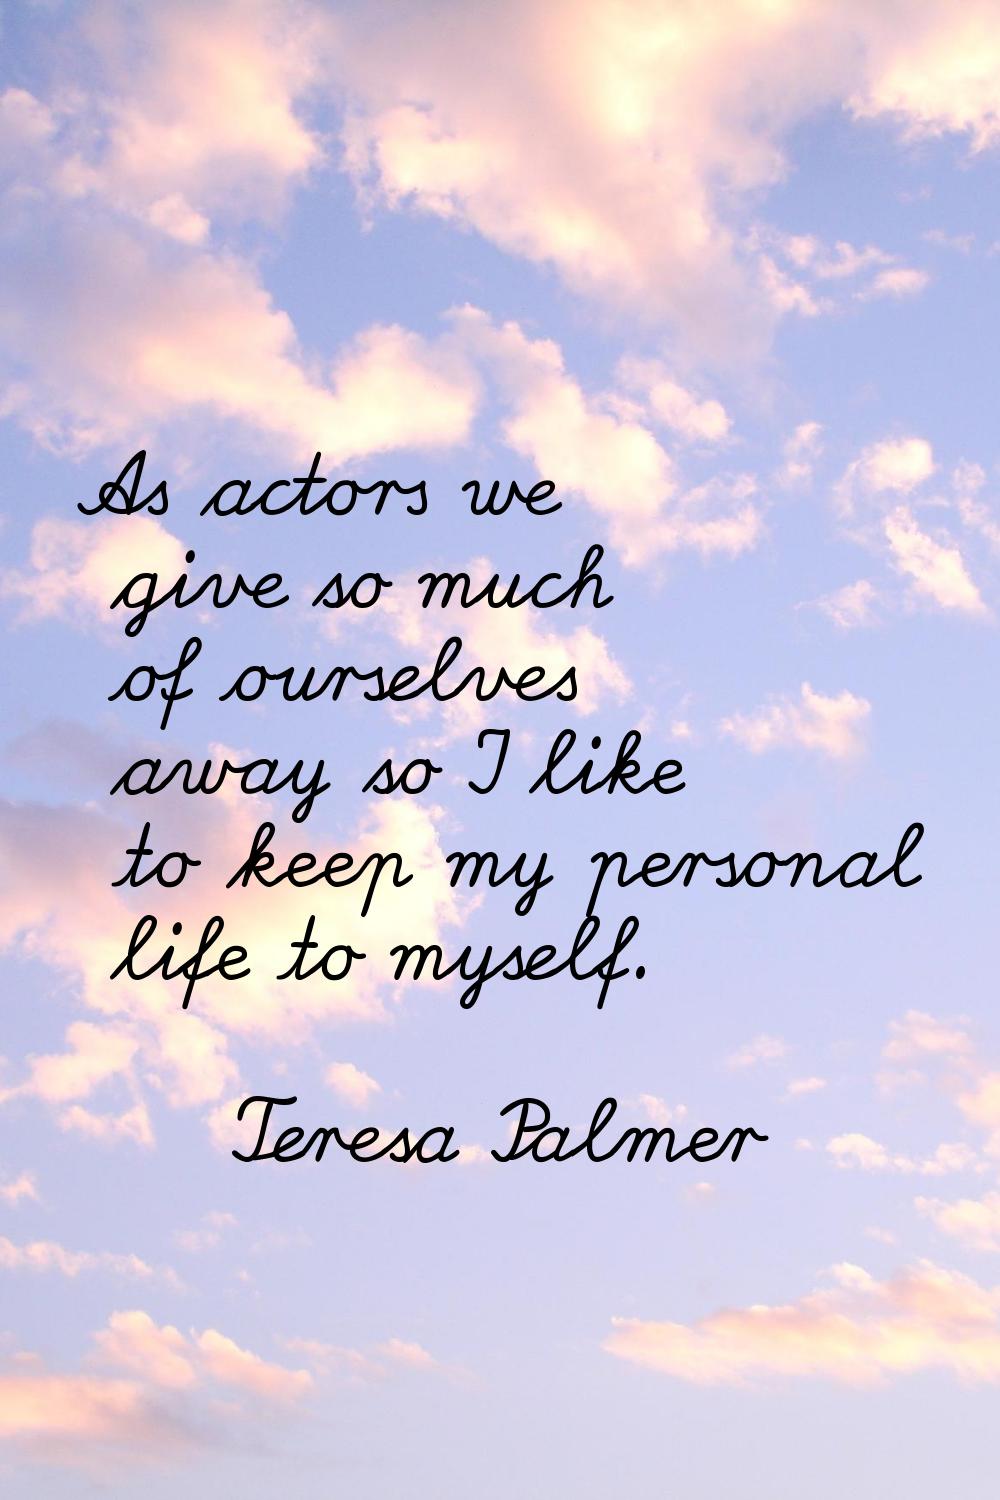 As actors we give so much of ourselves away so I like to keep my personal life to myself.